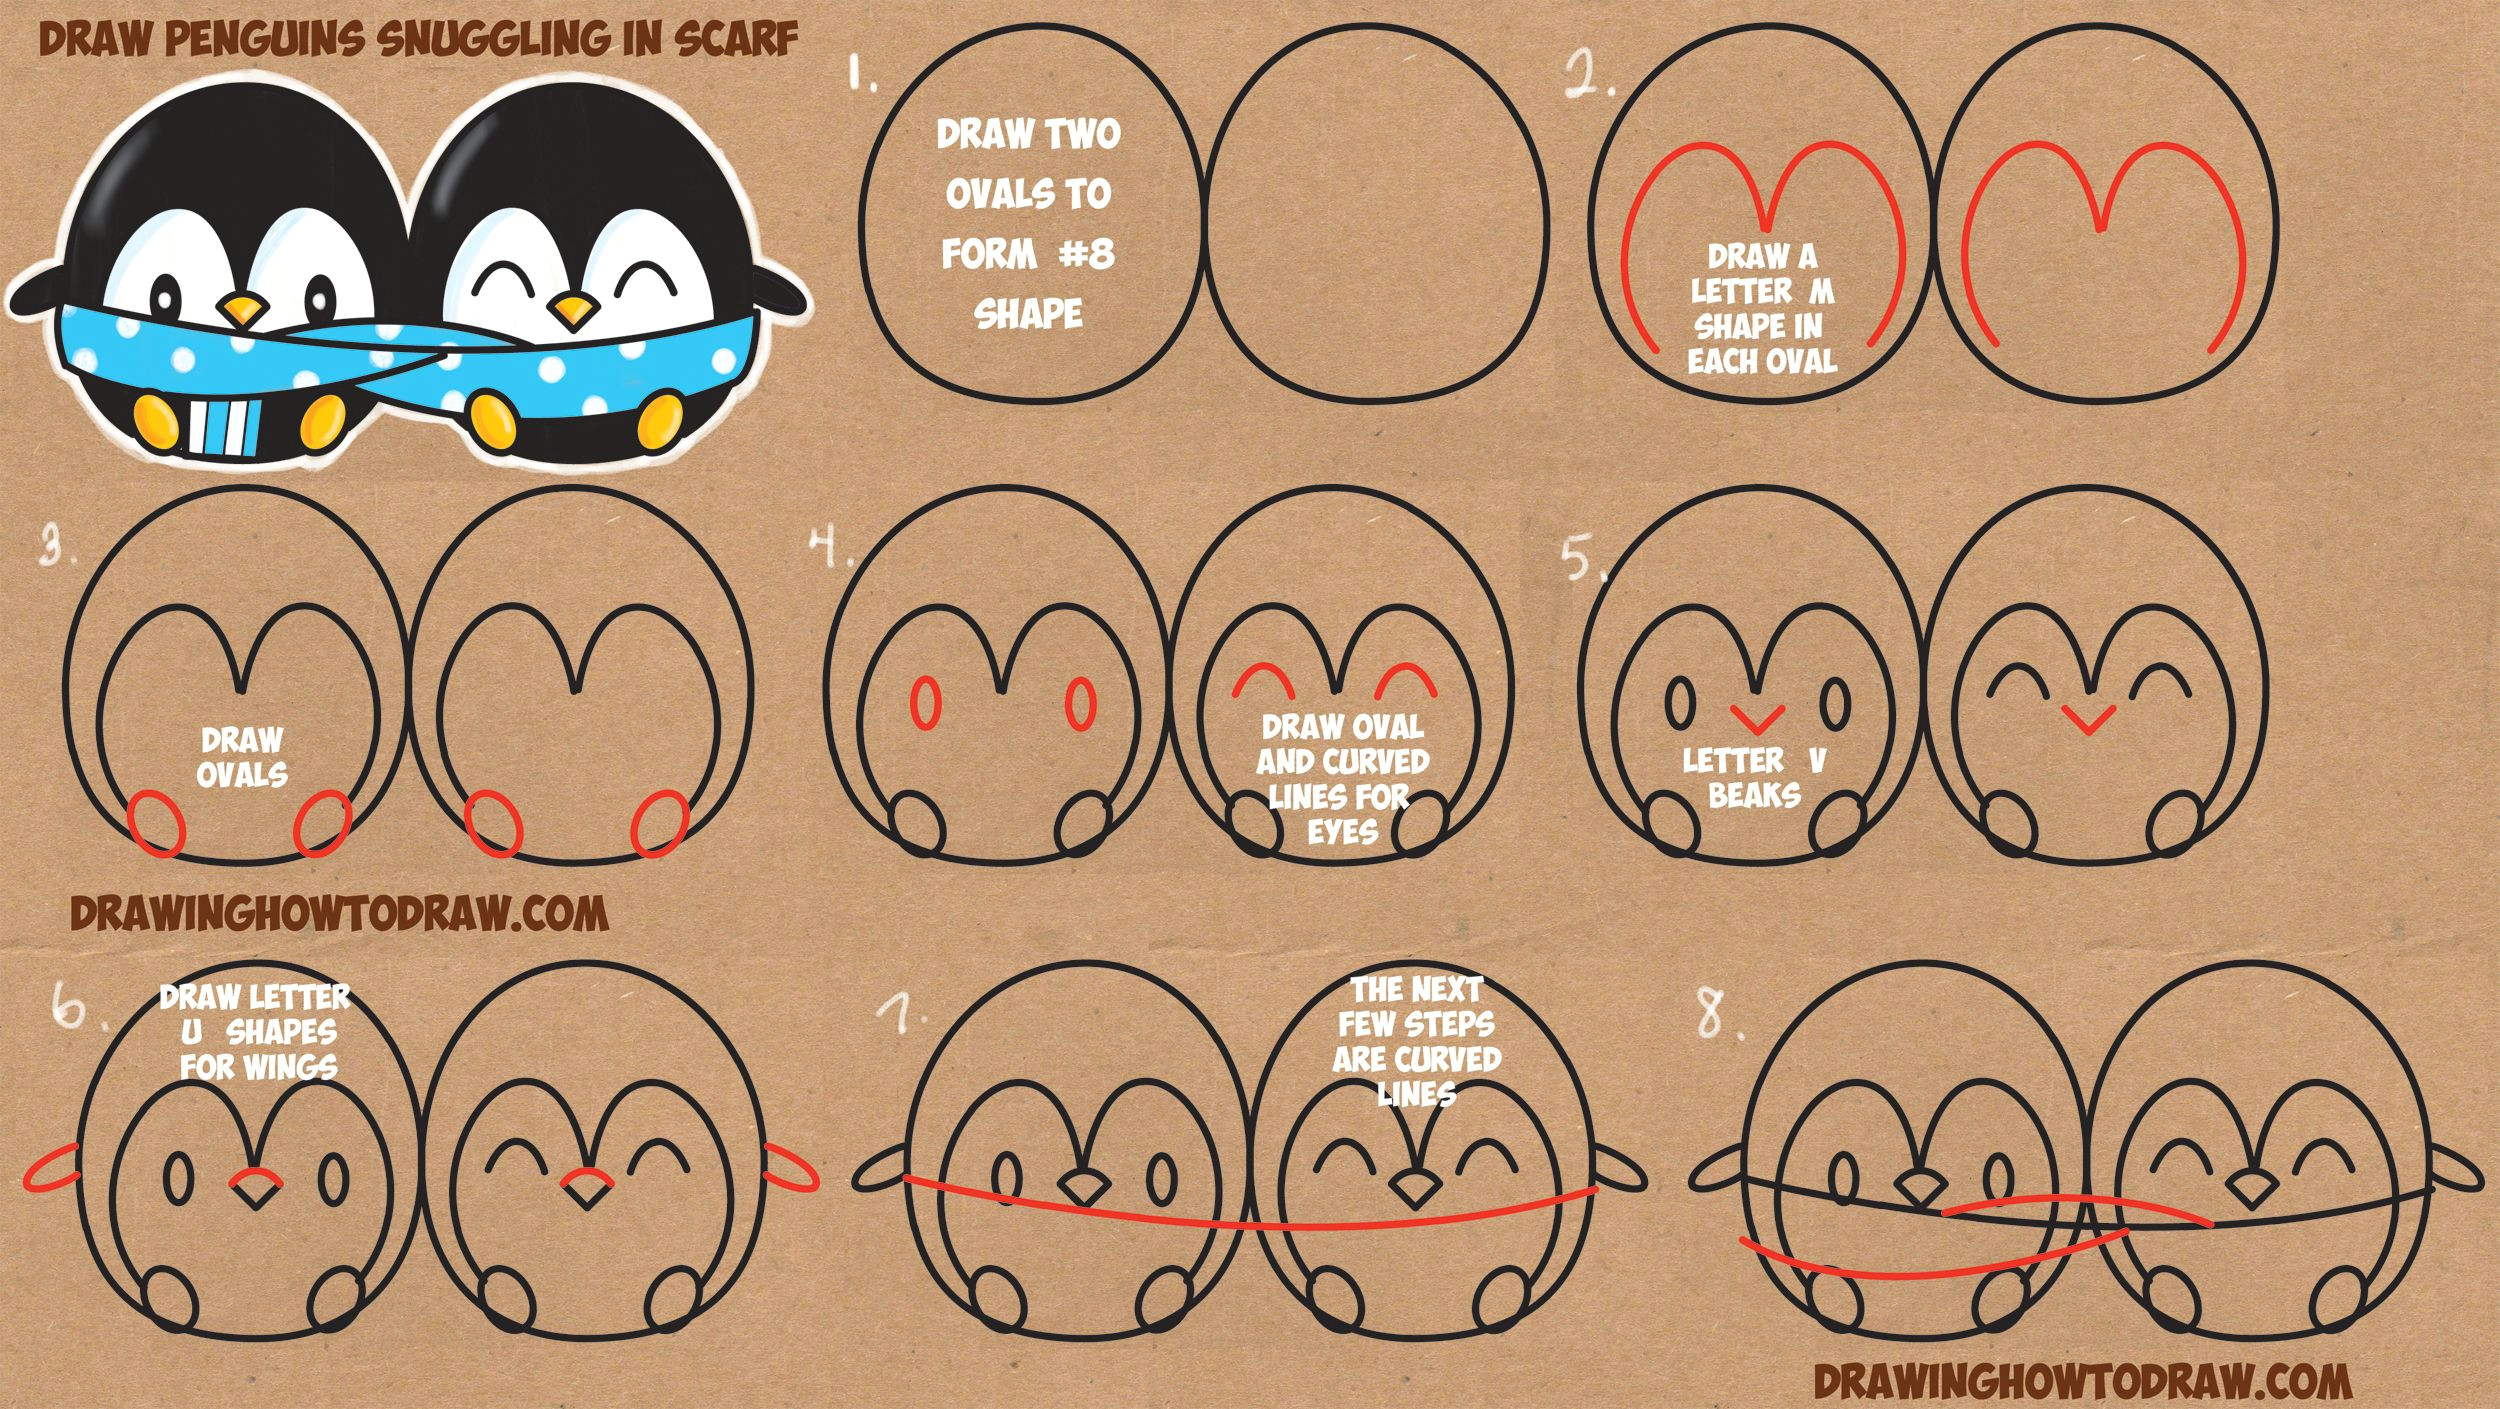 Cute Christmas Drawings Easy Step by Step How to Draw Cute Kawaii Chibi Cartoon Penguins In A Scarf